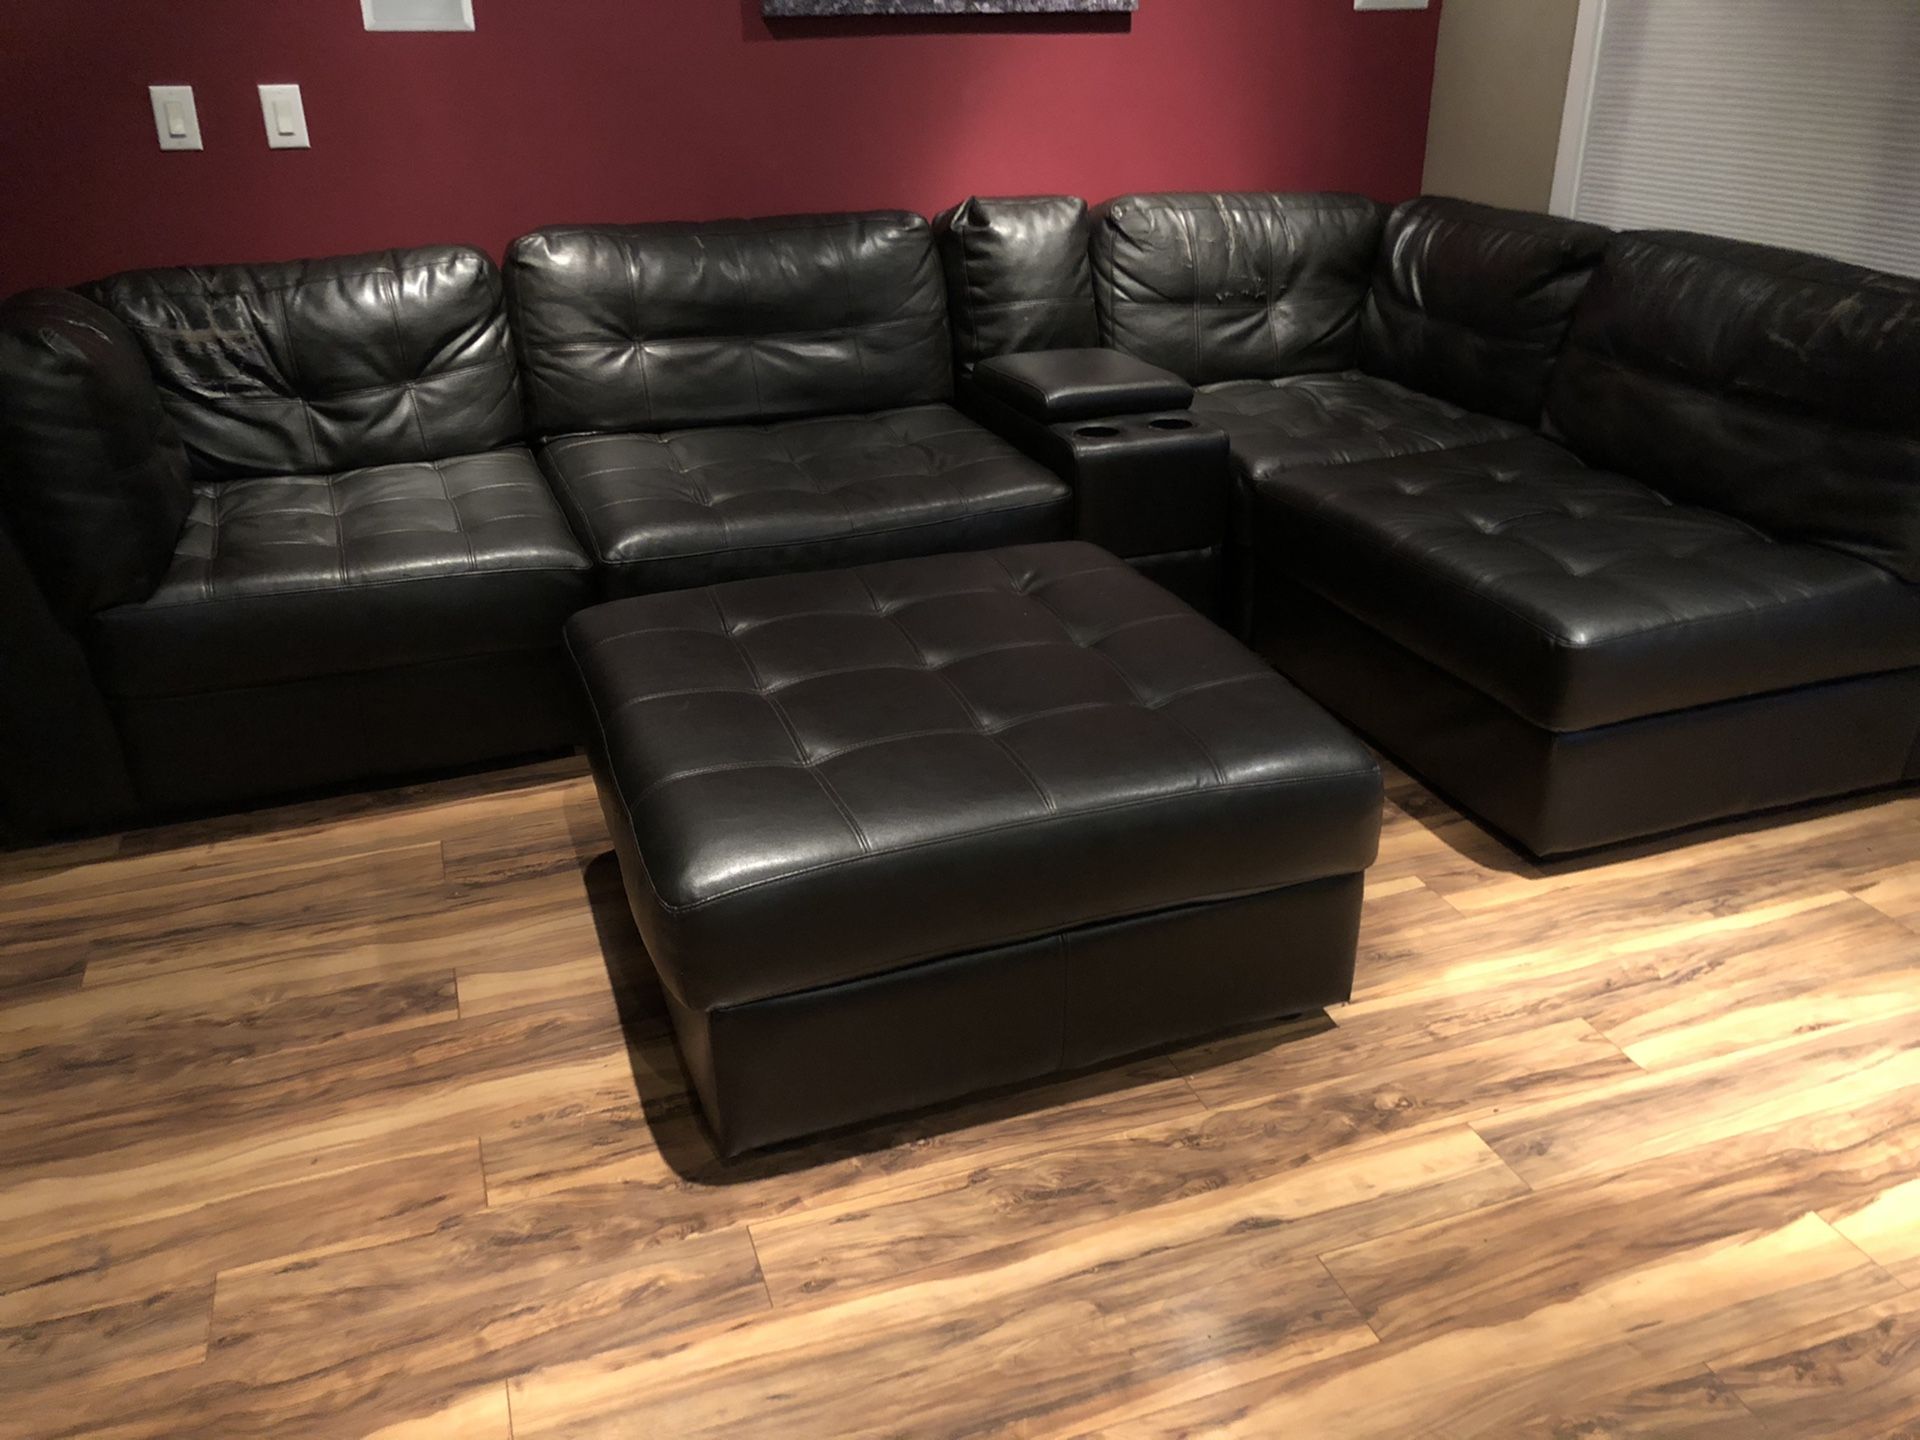 6-piece sectional couch - Huge Price Reduction!